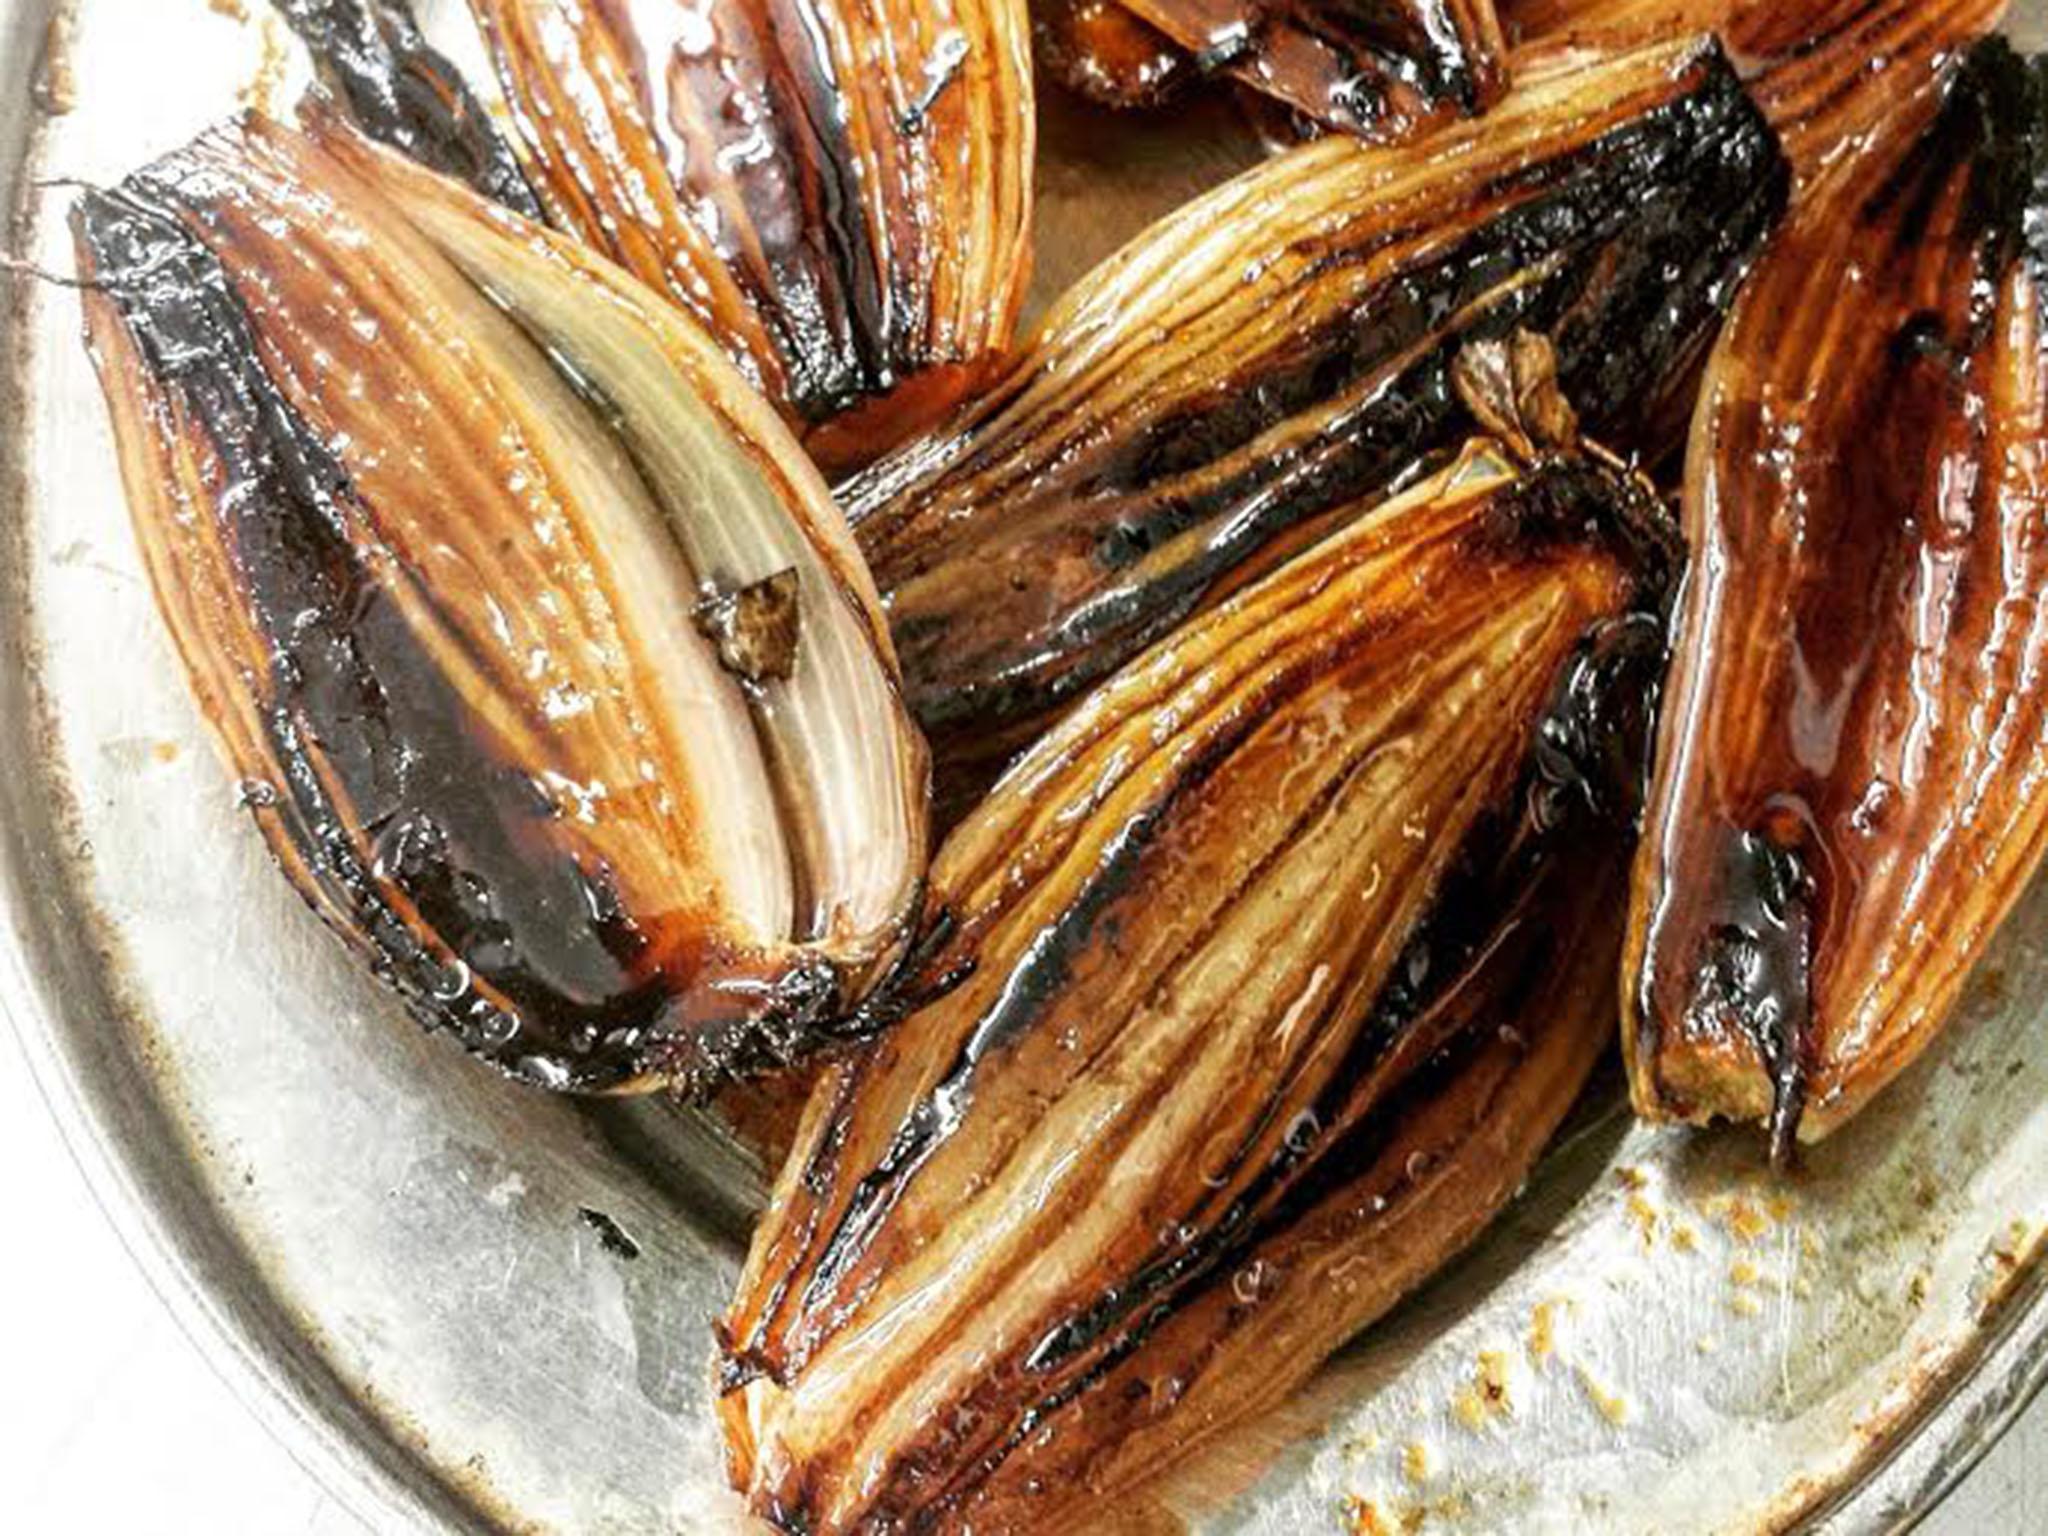 These glazed shallots are perfect as a side dish for any Sunday roast or steak, as well as chicken